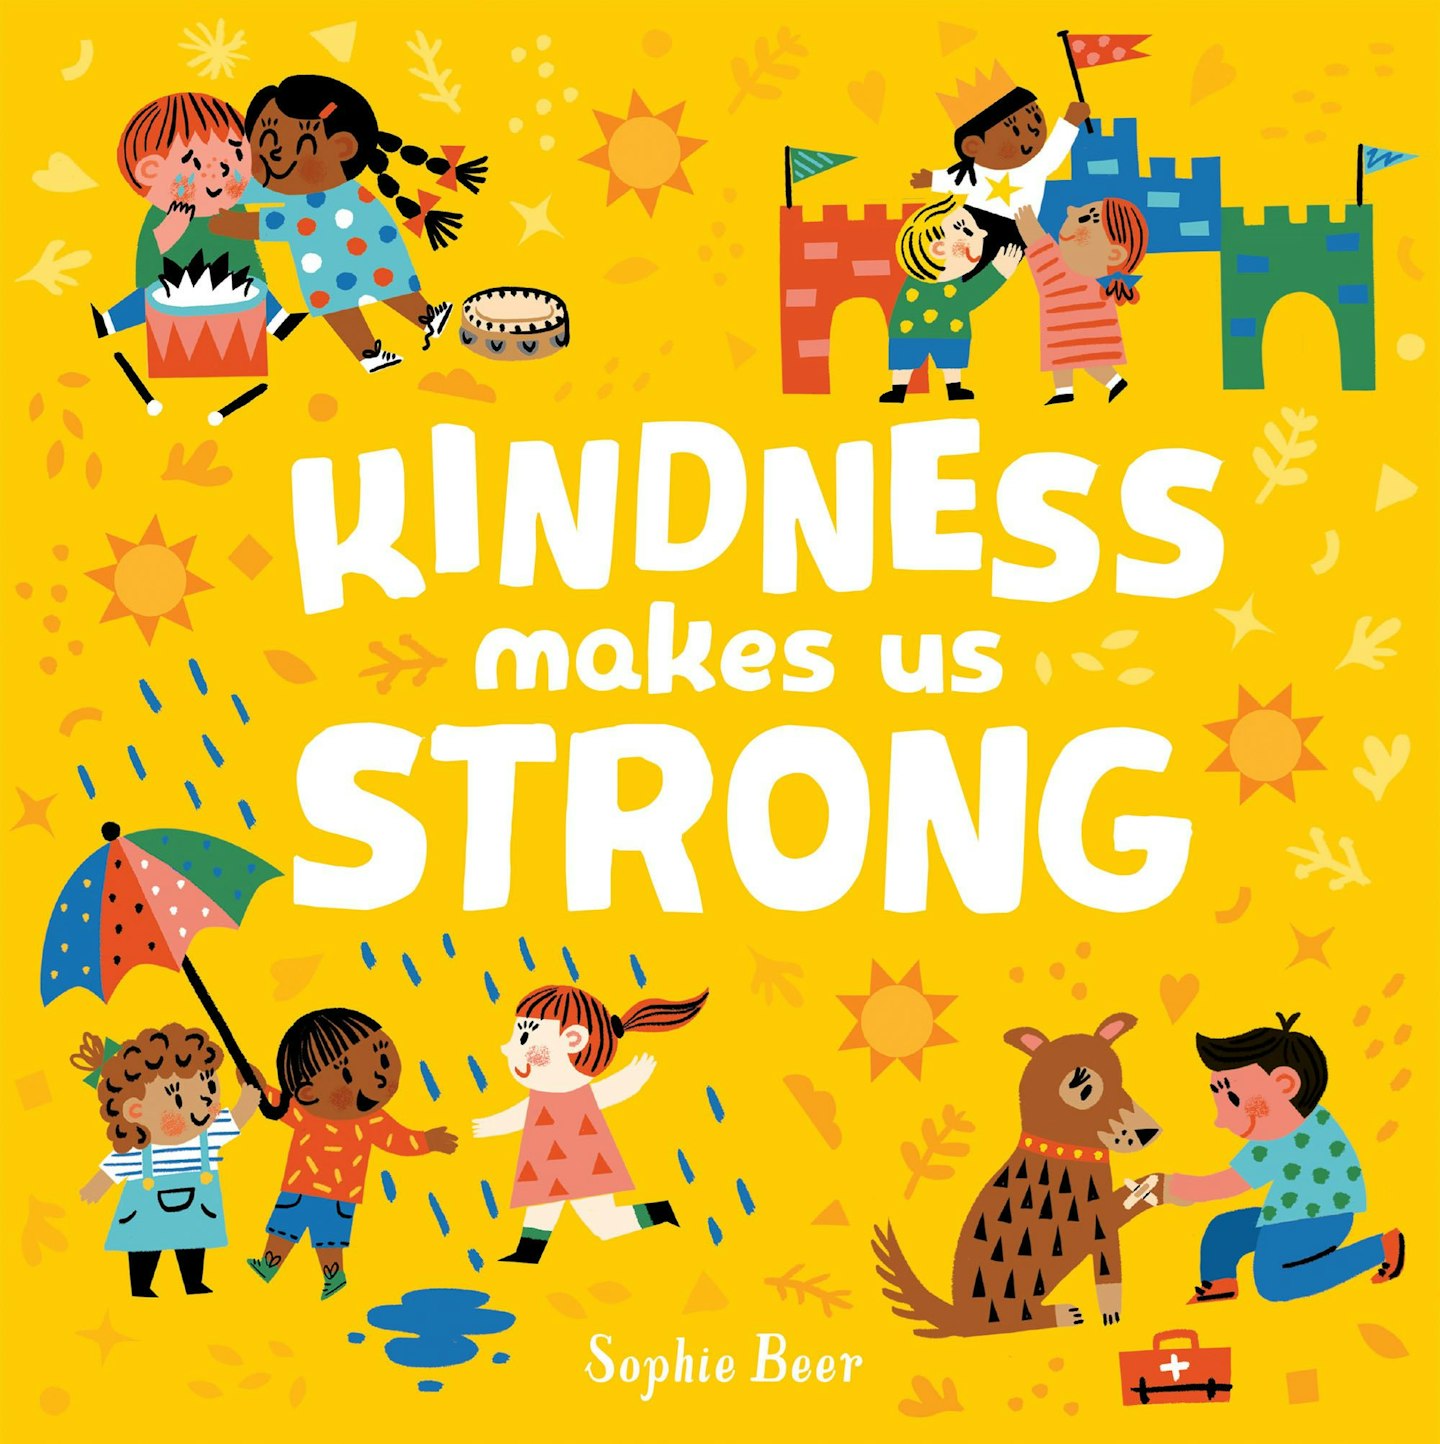 Best children's books about kindness